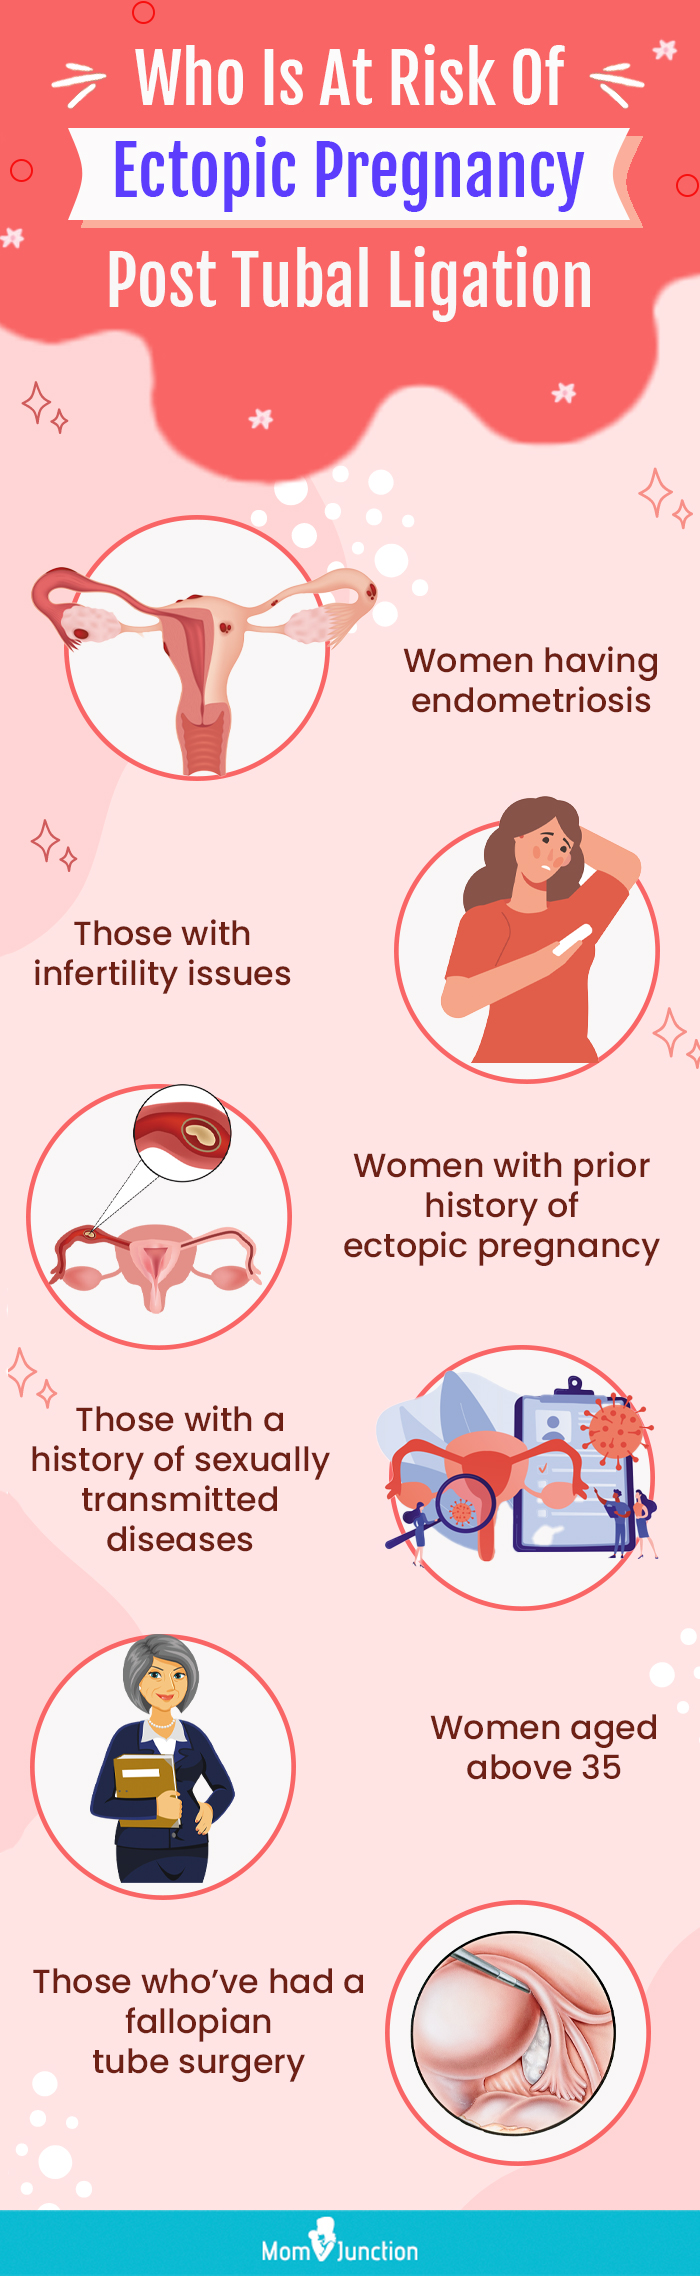 who is at risk of ectopic pregnancy post tubal ligation (infographic)